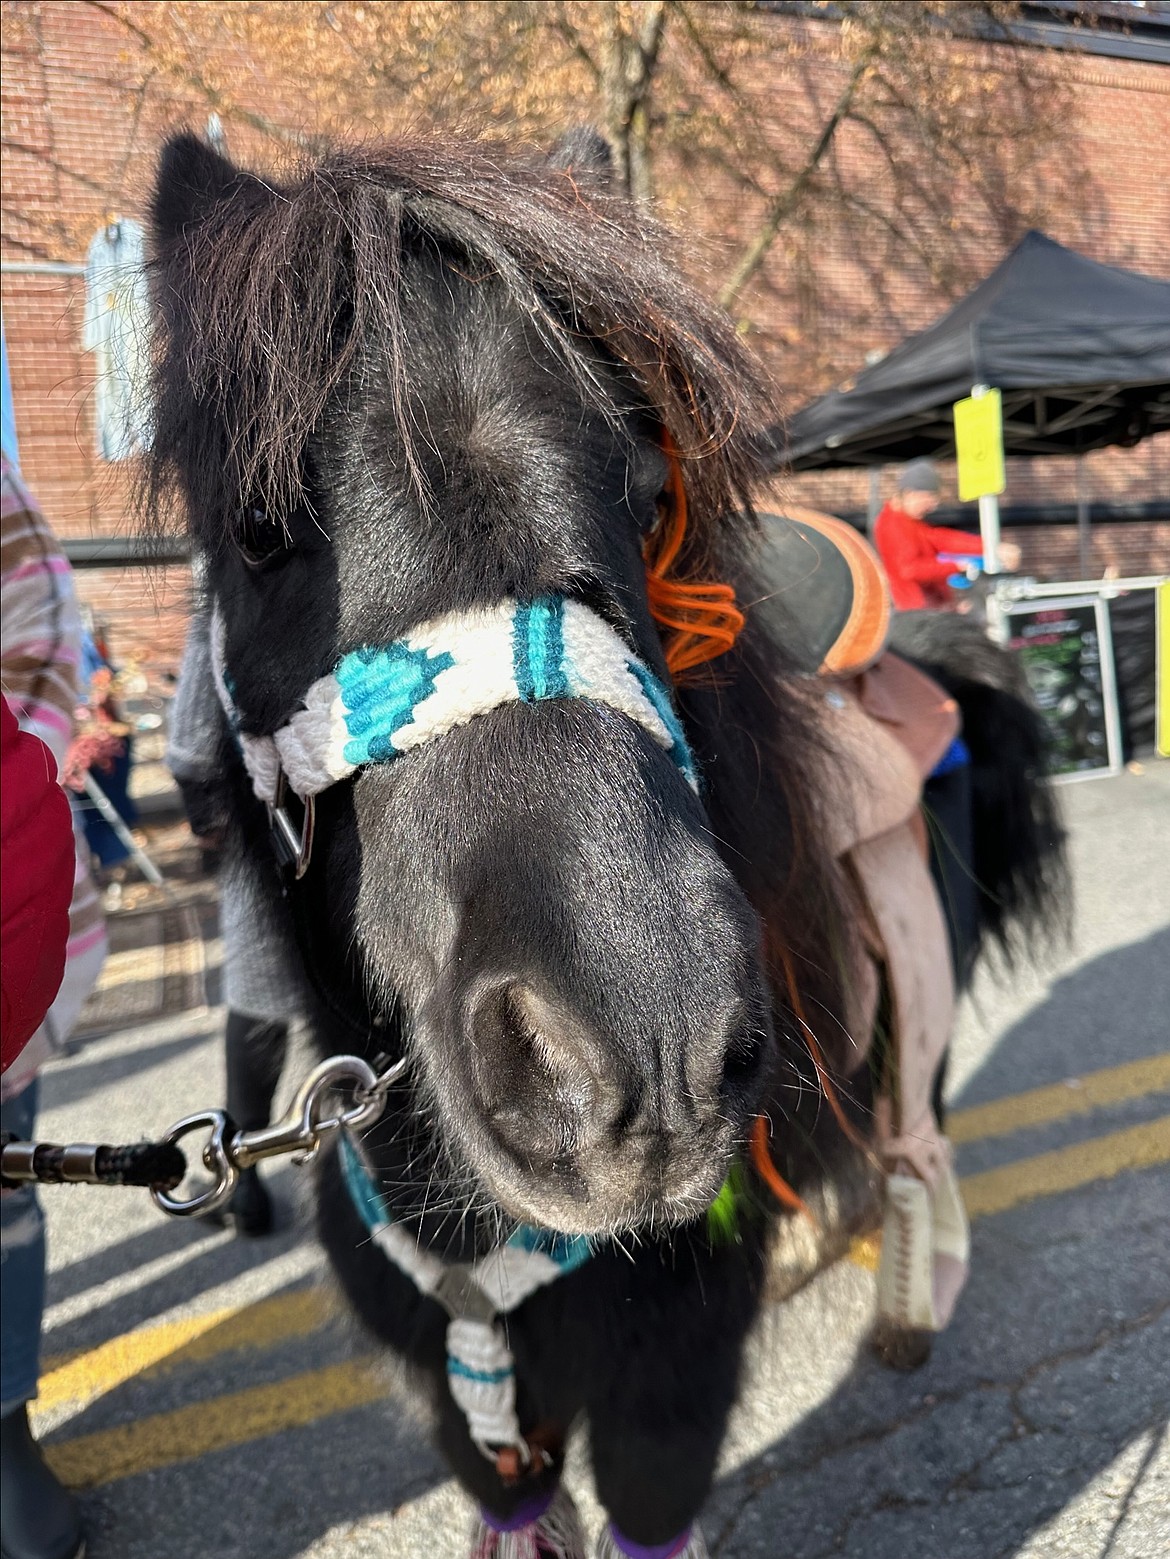 Pony rides were part of the petting zoo at the Fifth Street Farmer’s Harvest Market Saturday. The market was punctuated by a treasure hunt for apple treats through downtown as part of the Coeur d'Alene Downtown Association's annual Apple Palooza.